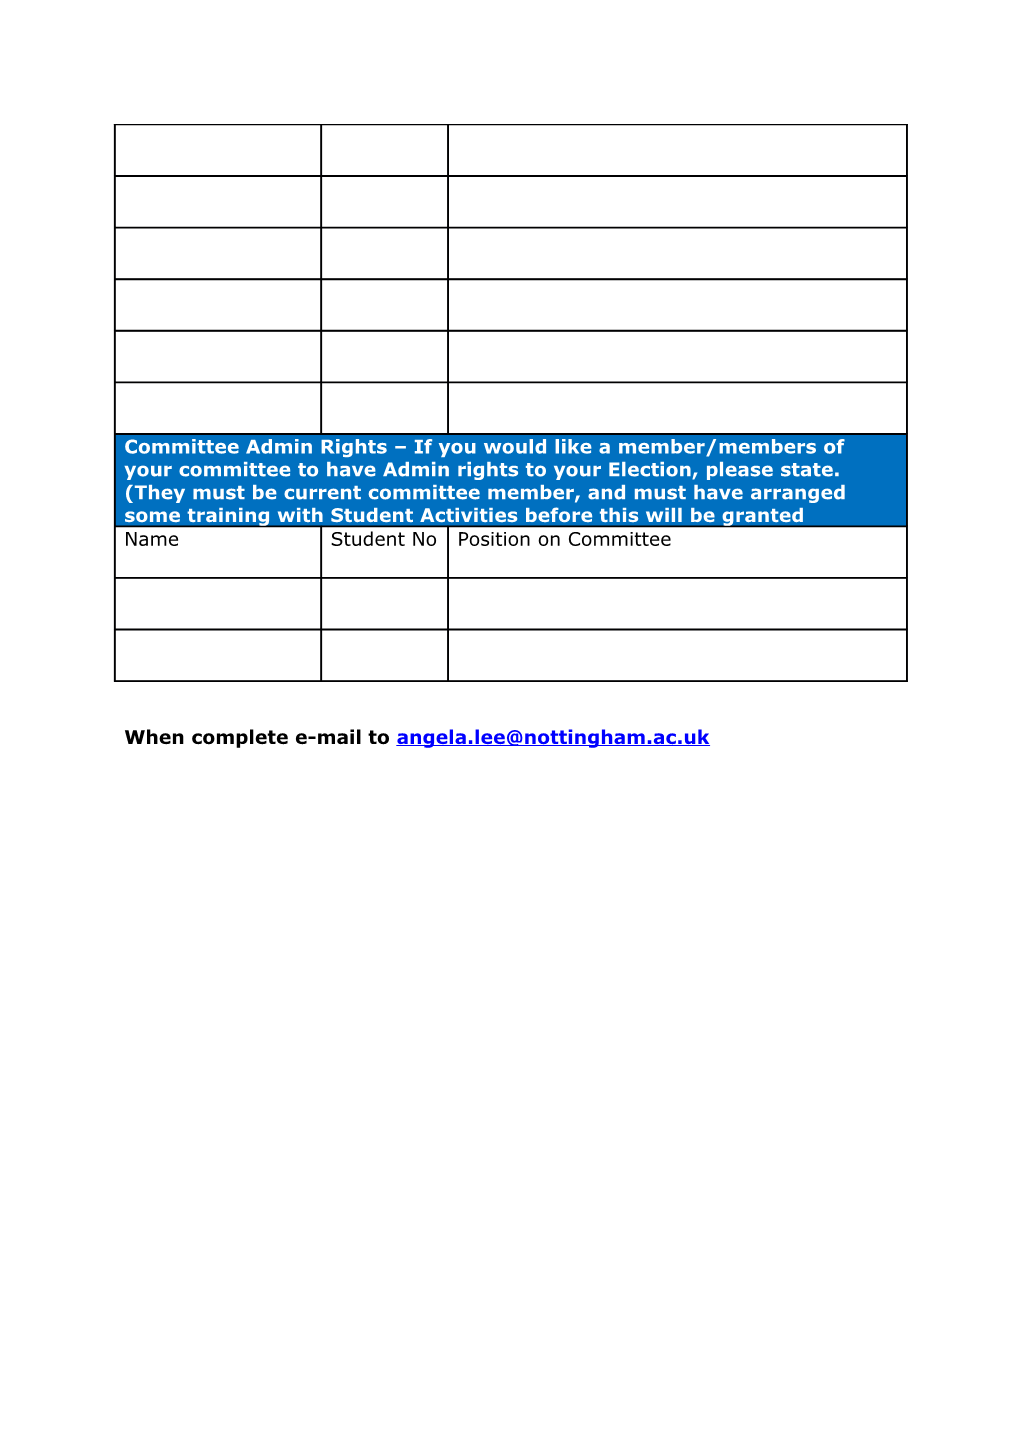 On-Line Election Request Form